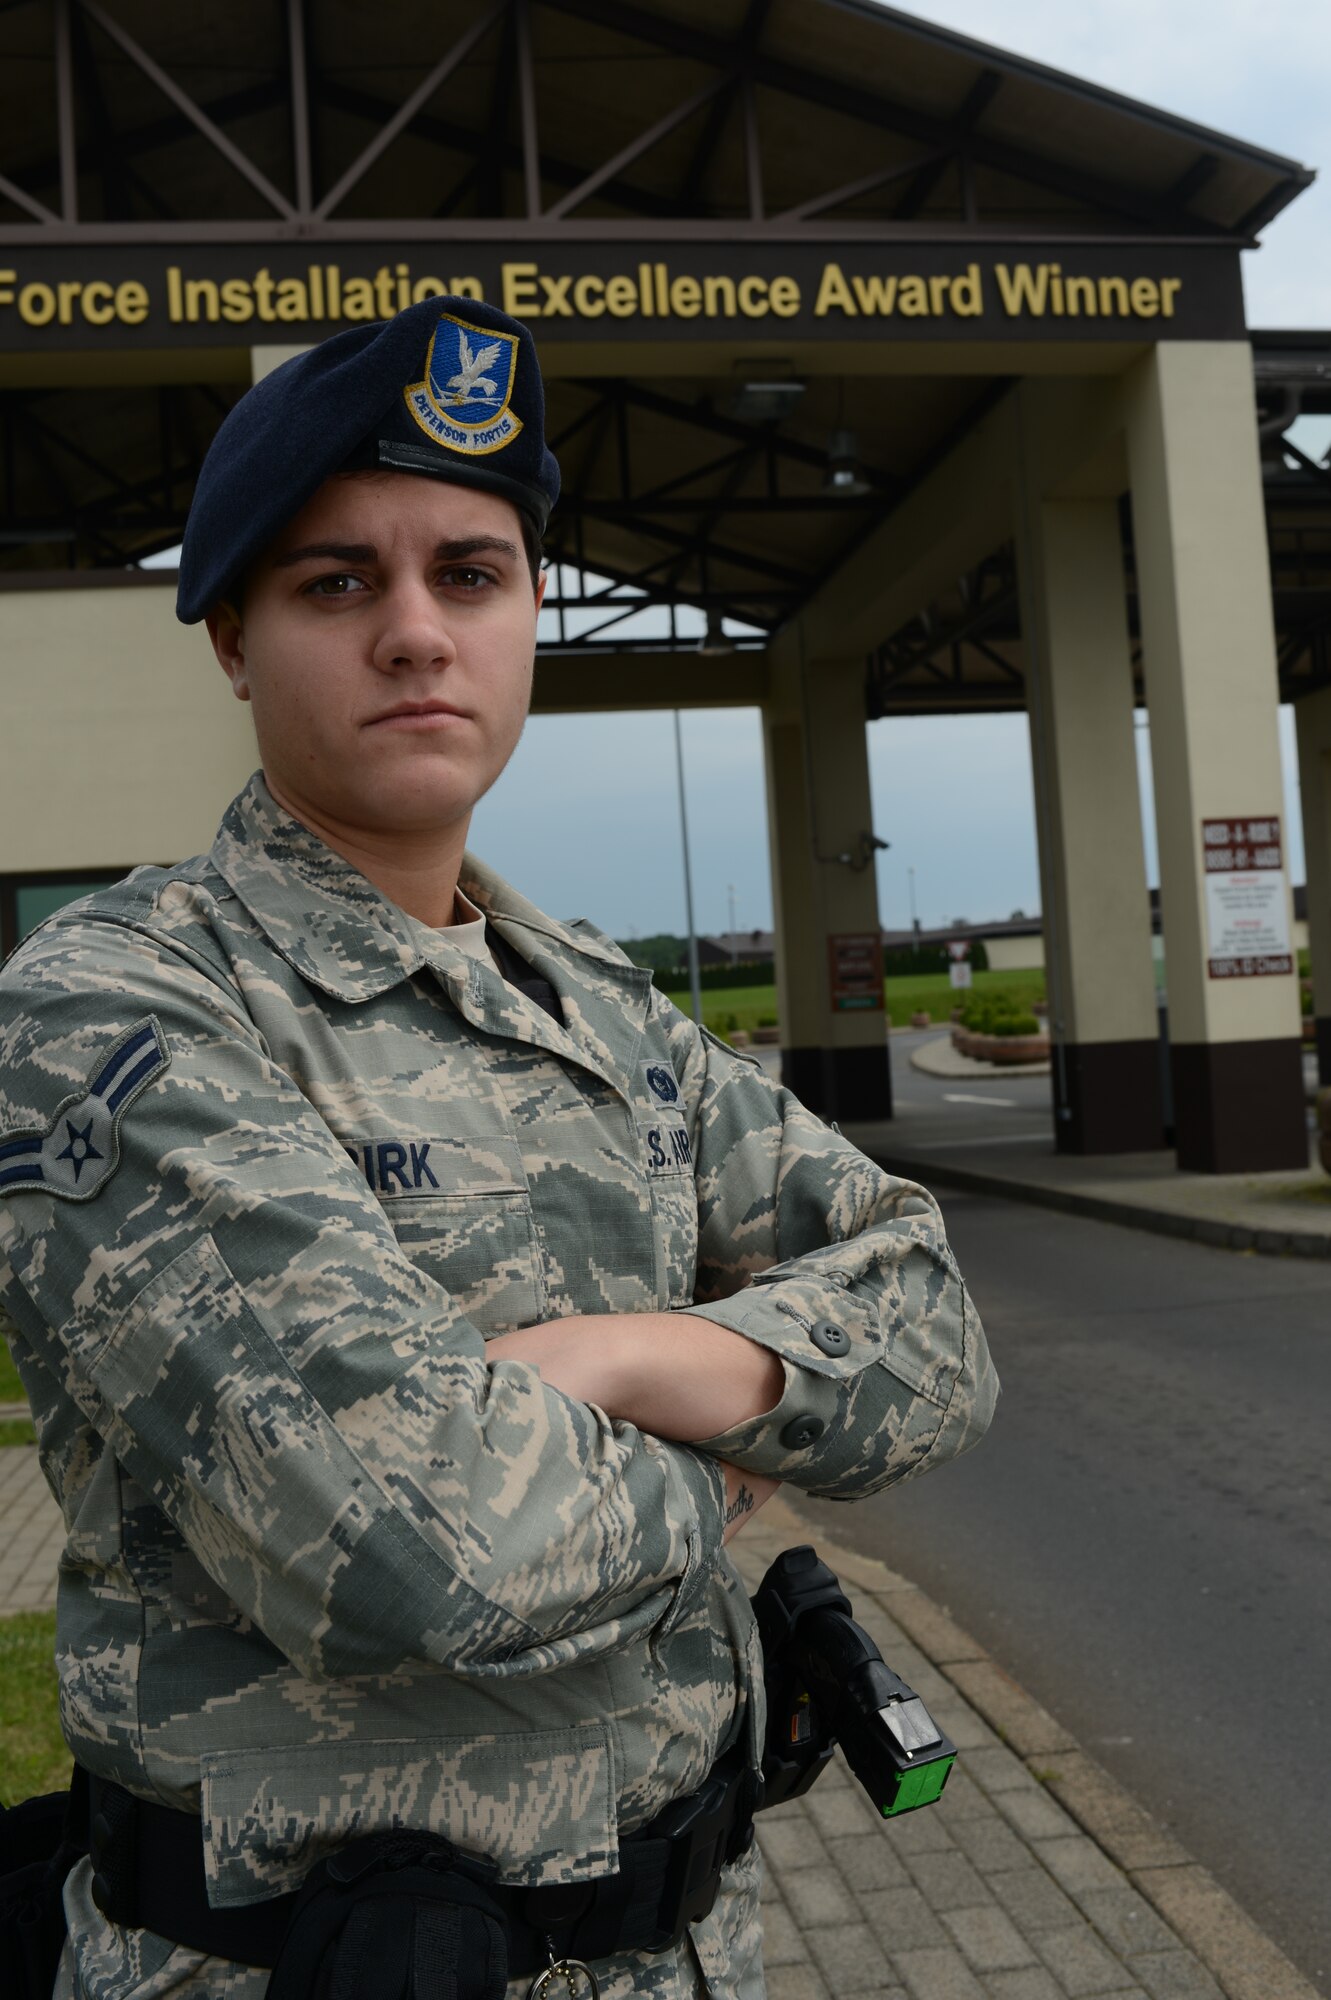 U.S. Air Force Airman 1st Class Kali S. Birk, 52nd Security Forces Squadron security forces member, from Thayer, Ill., is the Super Saber Performer for the week of July 10-16. (U.S. Air Force photo by Senior Airman Gustavo Castillo/Released)